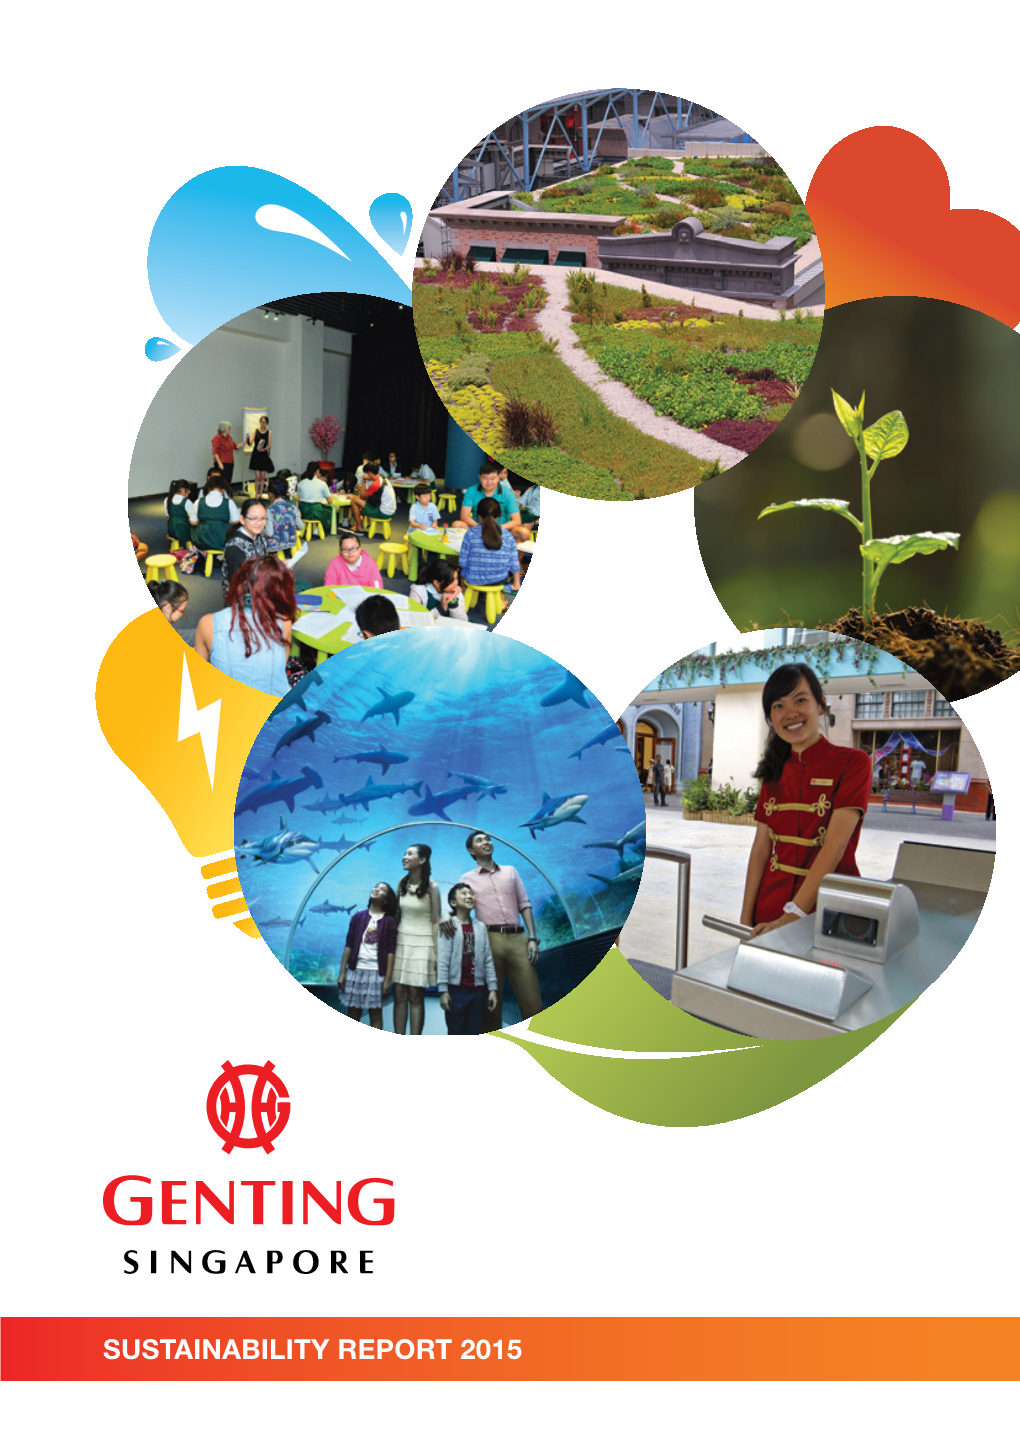 SUSTAINABILITY REPORT 2015 2 GENTING SINGAPORE Table of Content Message from Our President GENTING SINGAPORE 3